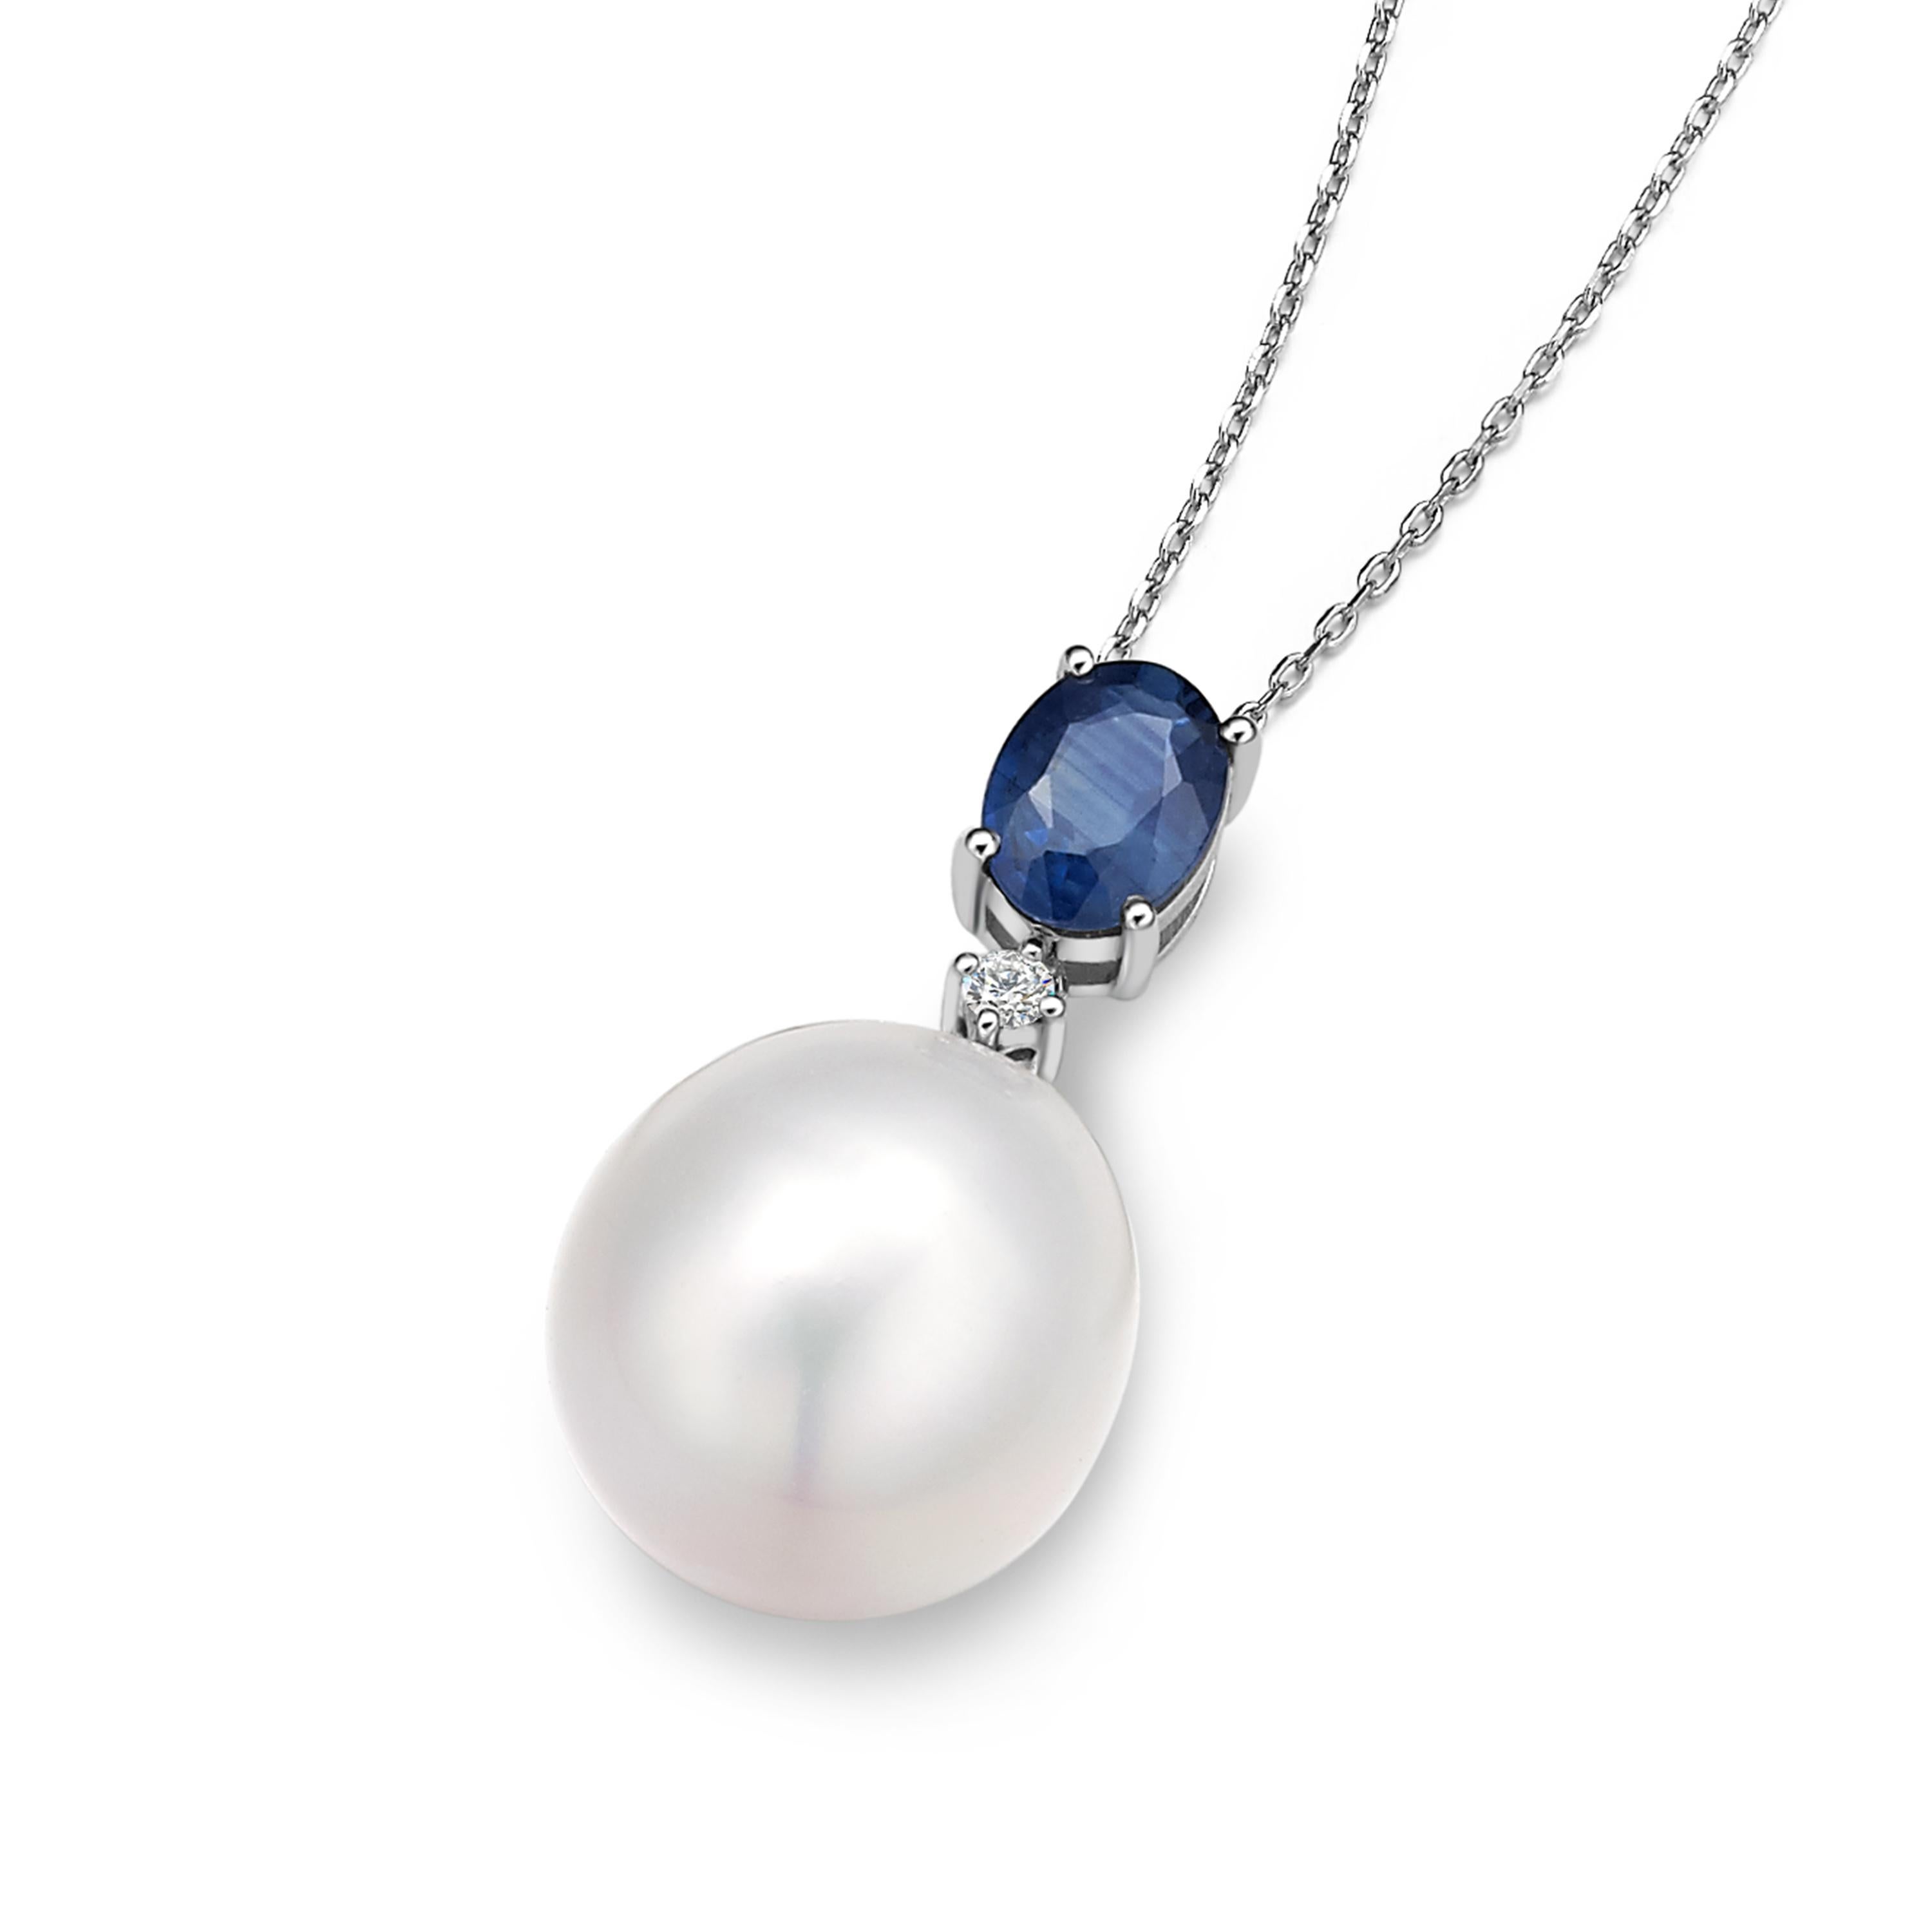 Description:
Pendant with 0.98ct blue sapphire, 0.027ct white diamonds and 14mm x 13mm freshwater pearl. Set in 18ct white gold. Chain length is 16 inches.

Inspiration:
This Fei Liu pendant combines some of the most durable gemstones to create a